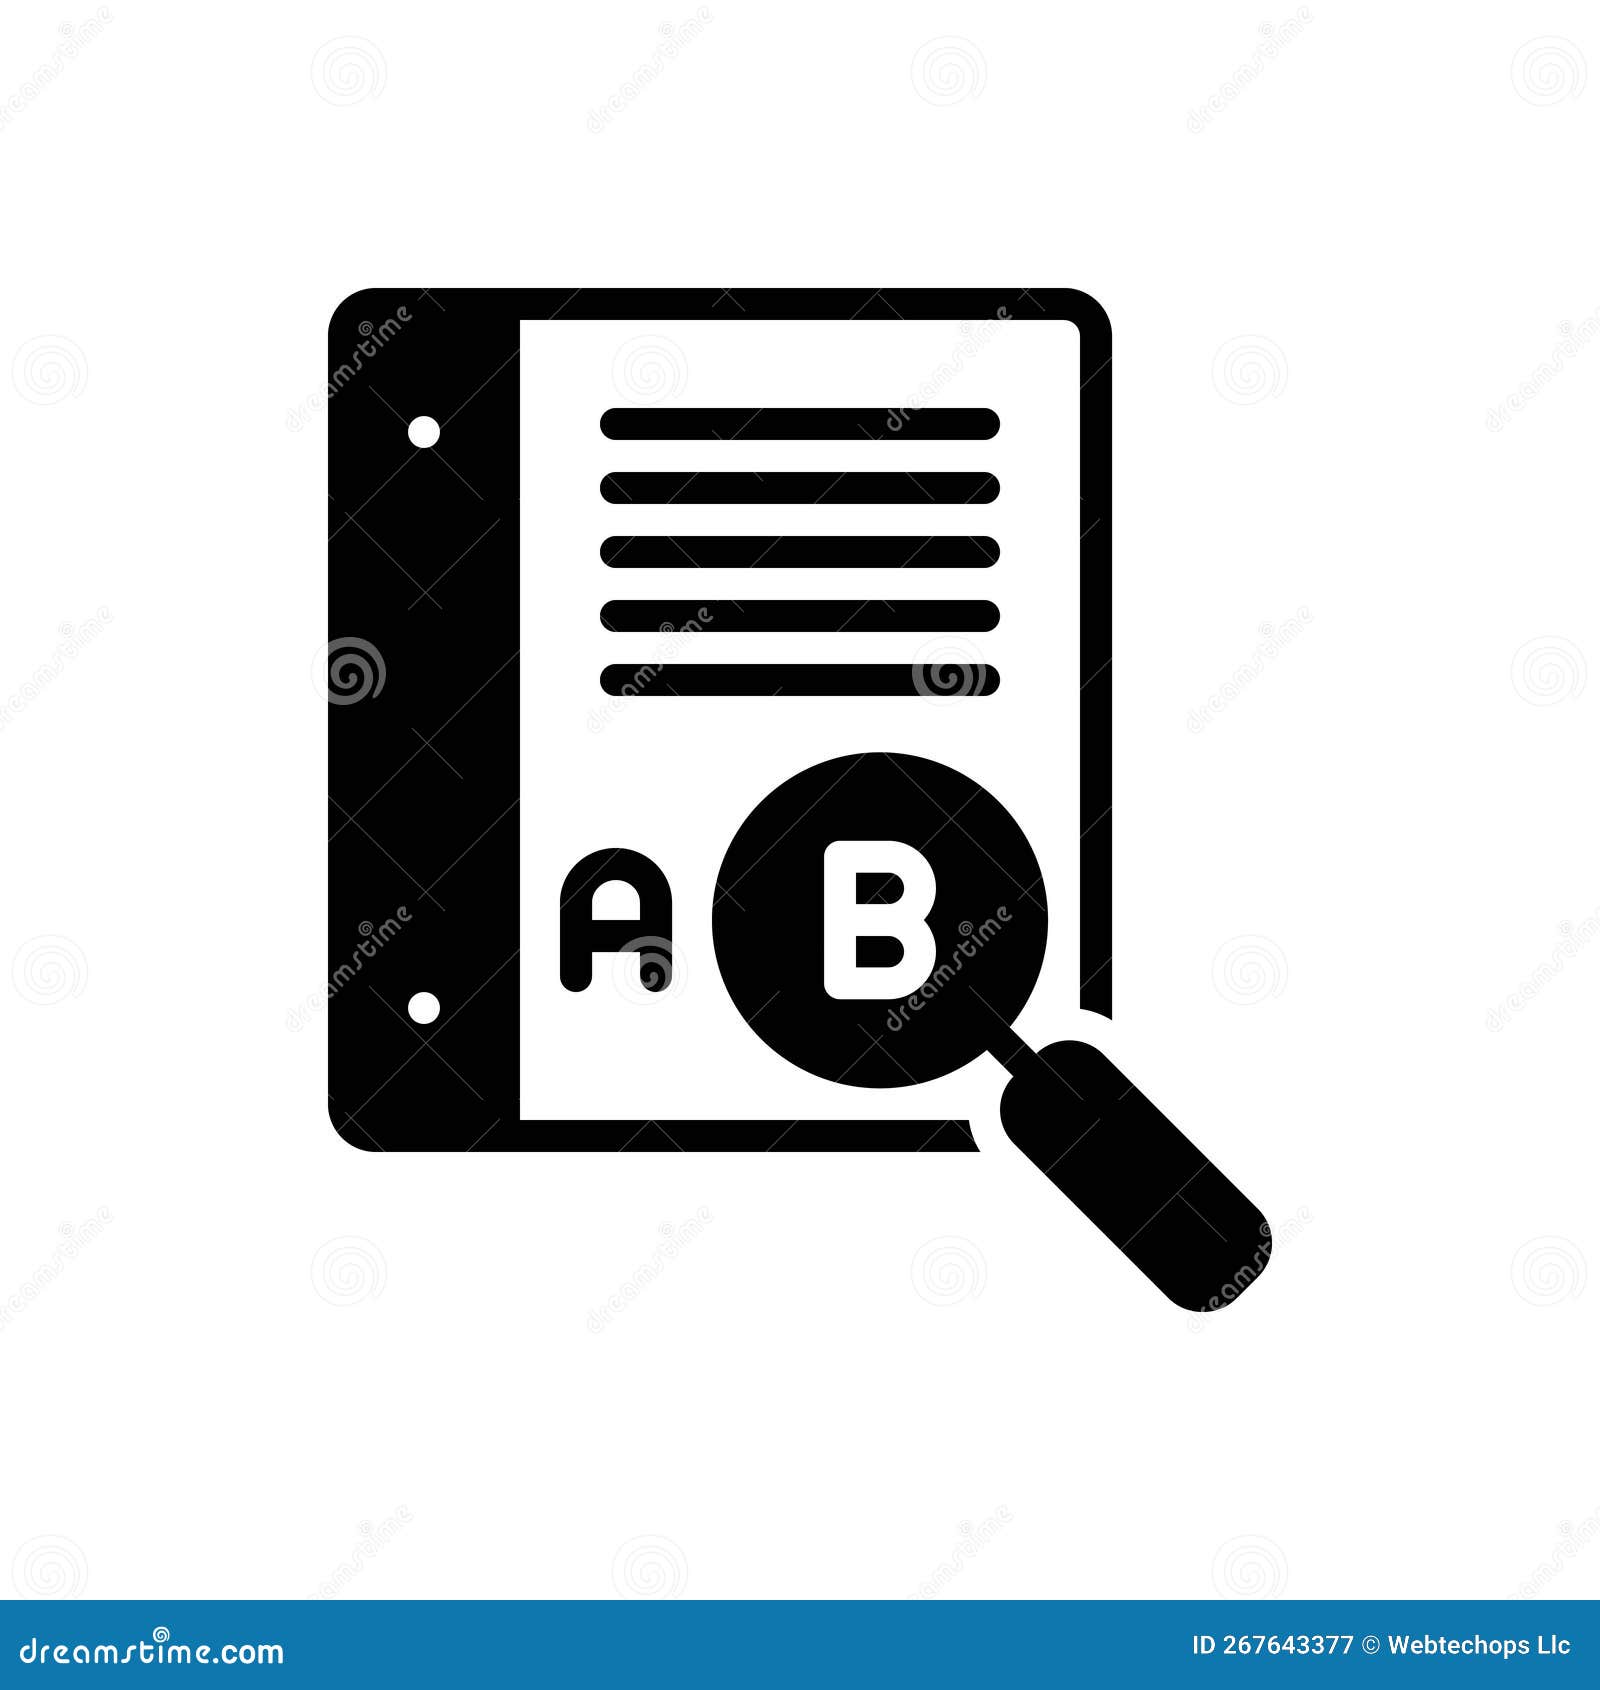 black solid icon for thesaurus, word book and boom